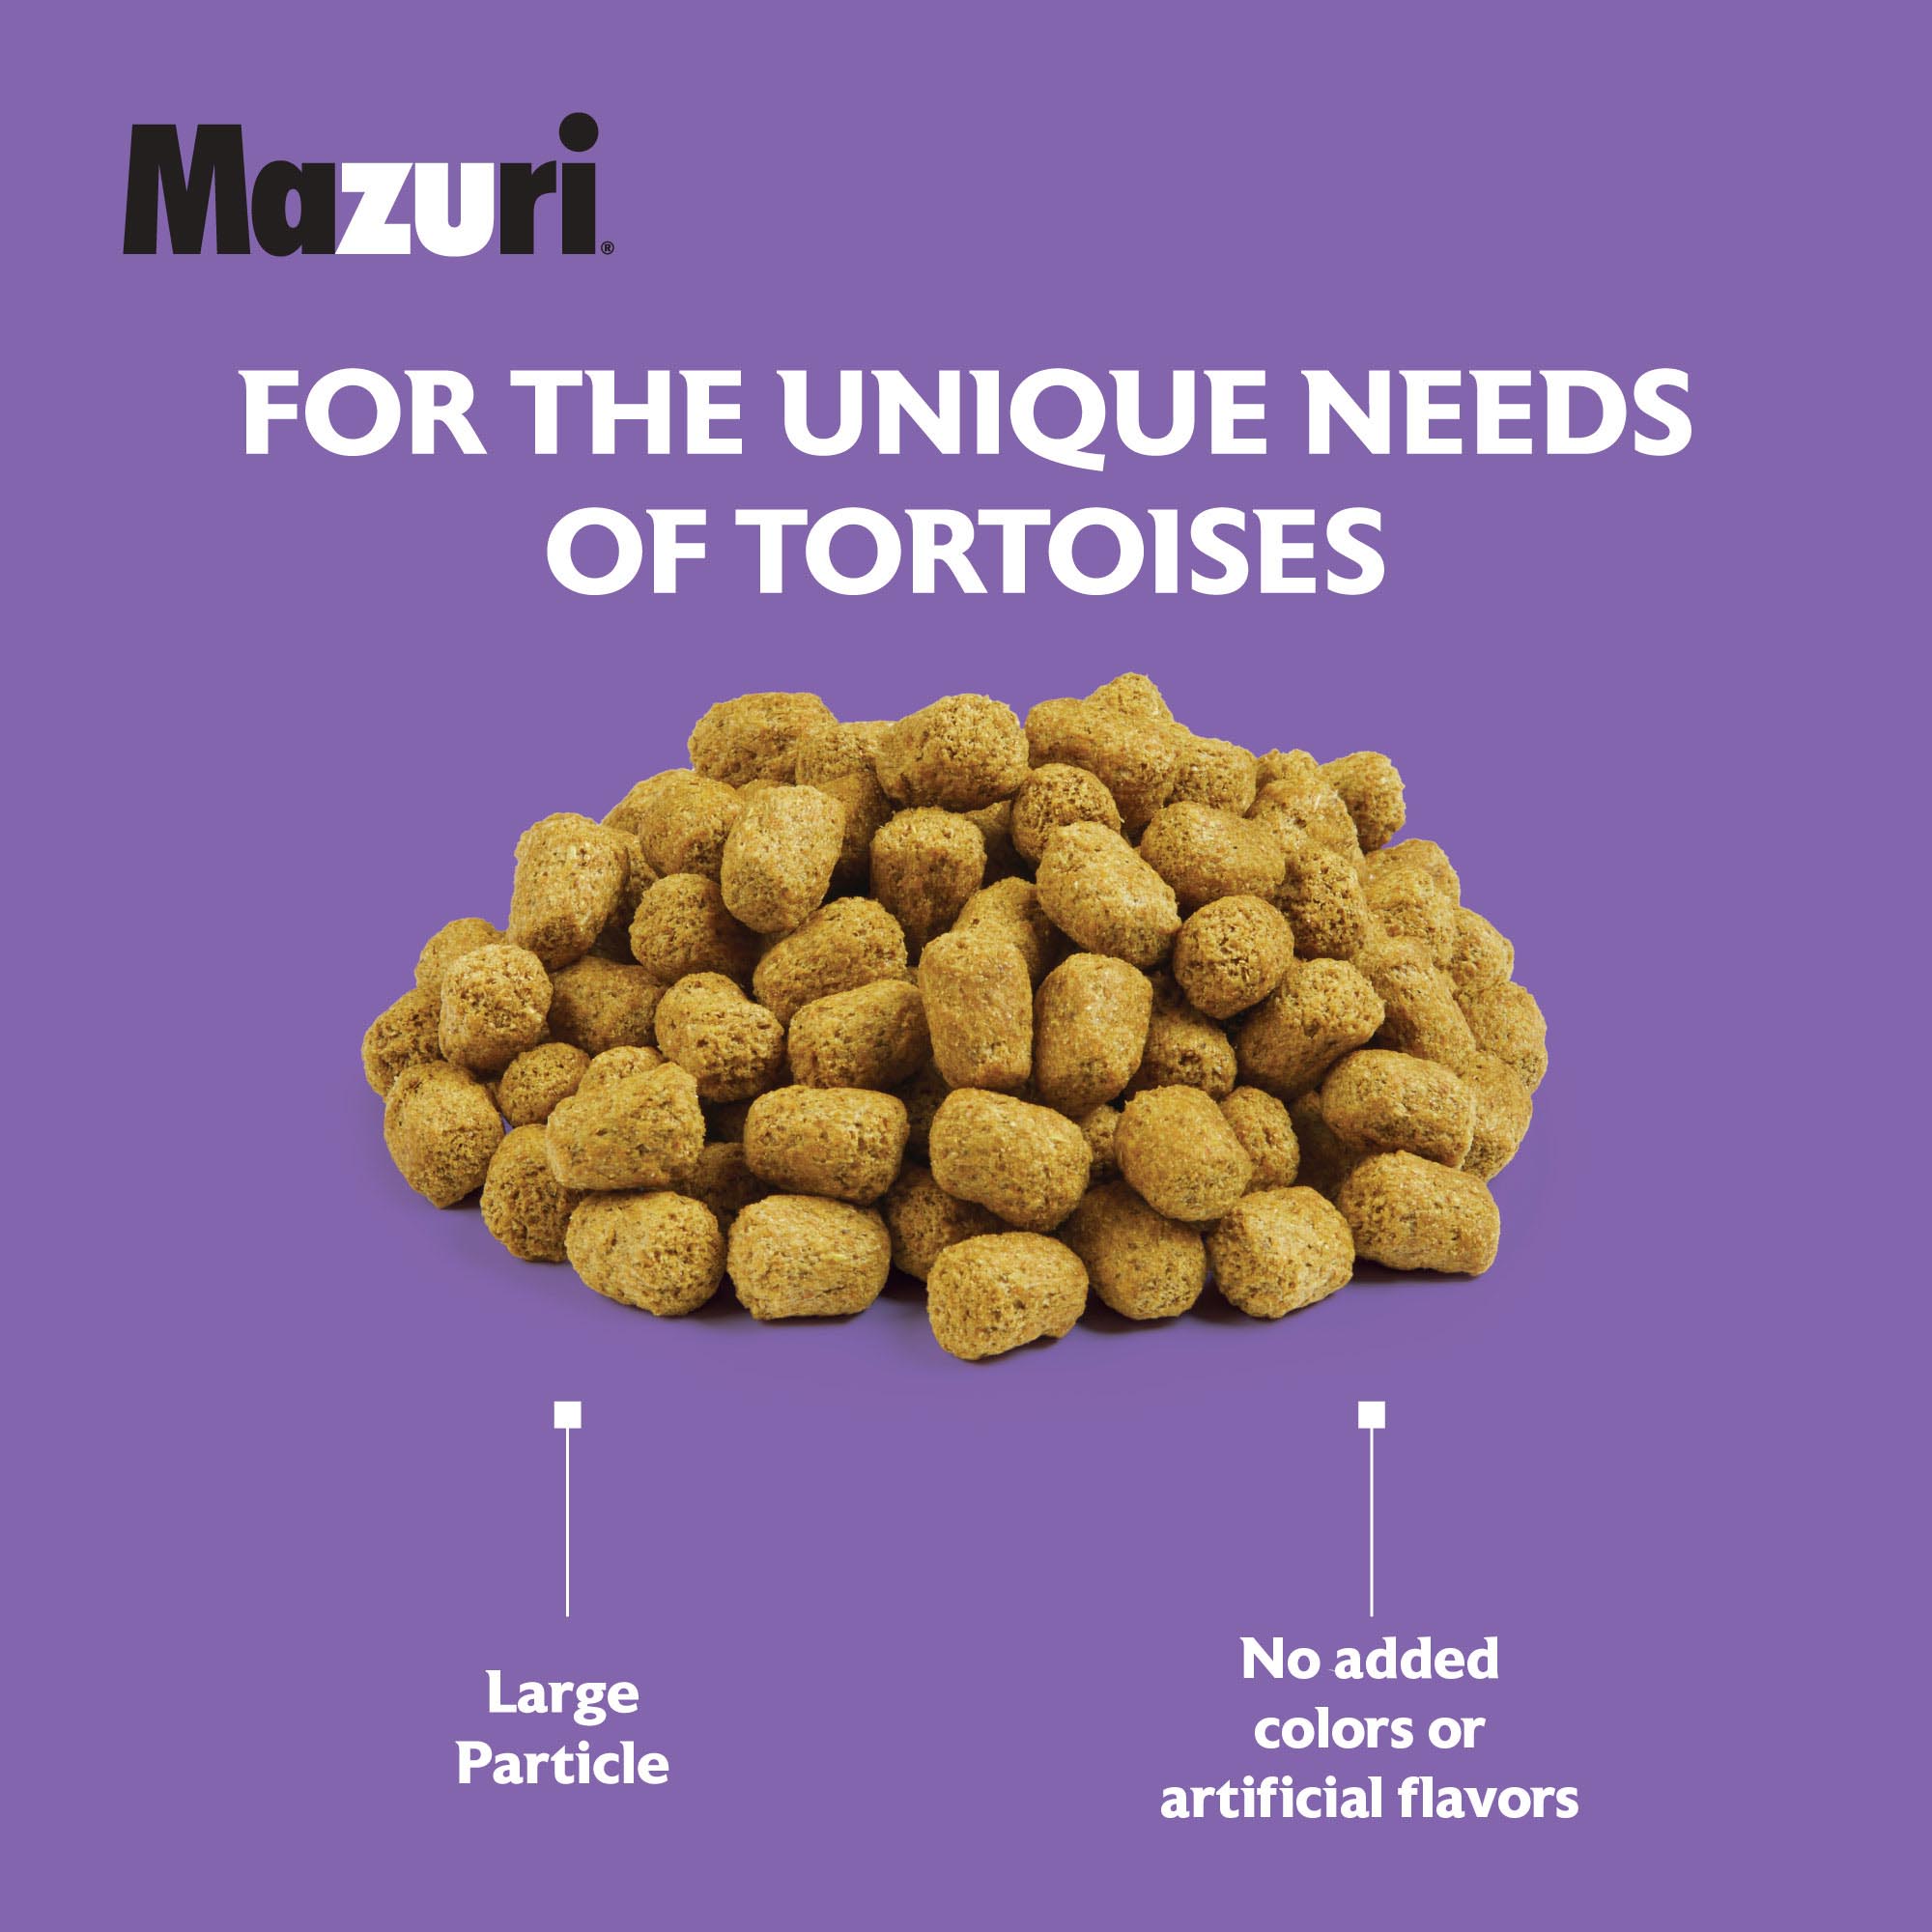 The Mazuri tortoise diet in a pile on a purple background